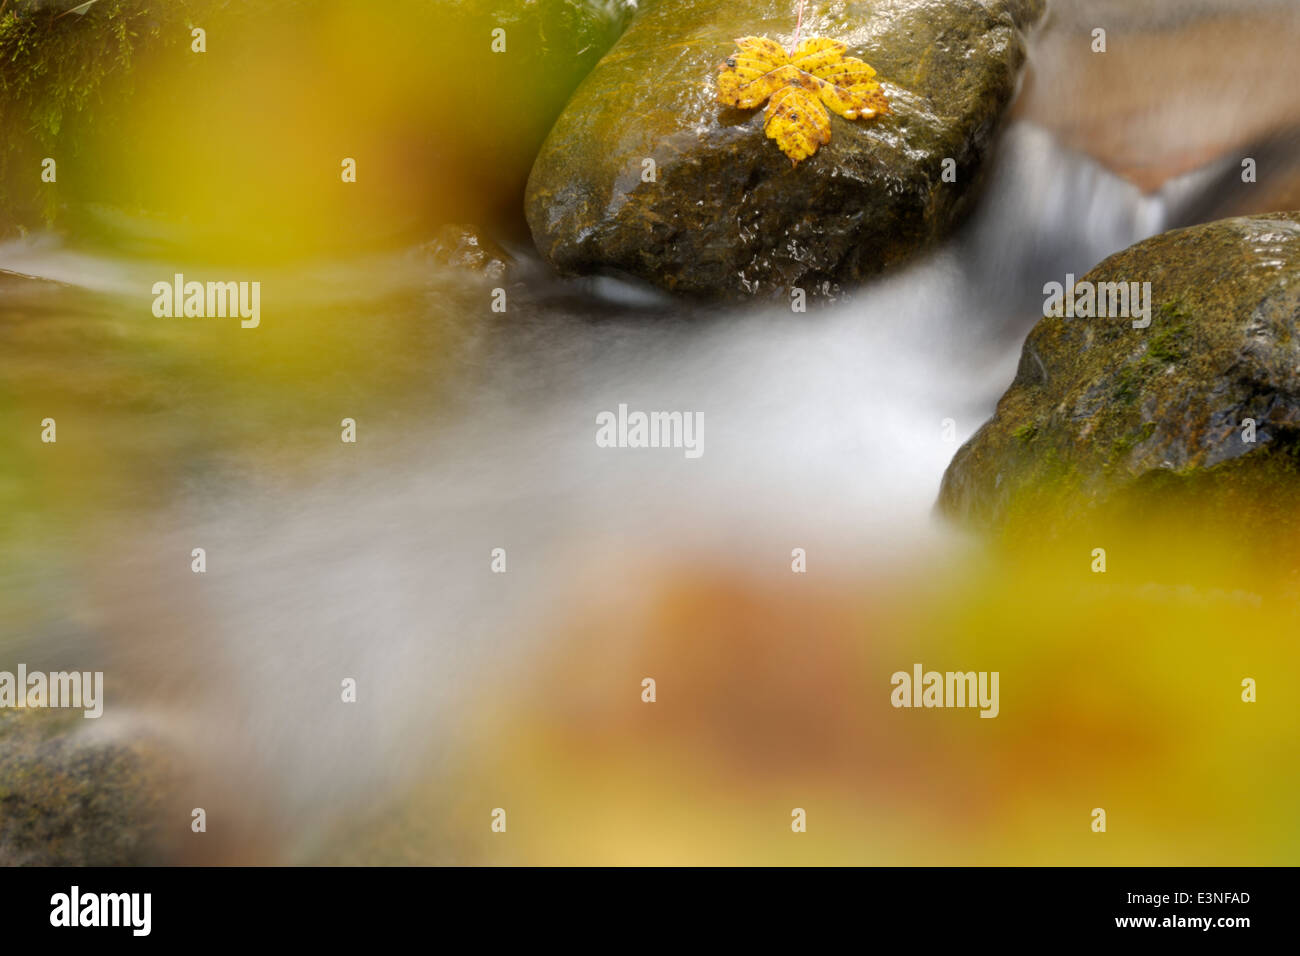 Mountainstream with autumn leave and slow shutter speed and out of focus leaves in foreground. Stock Photo